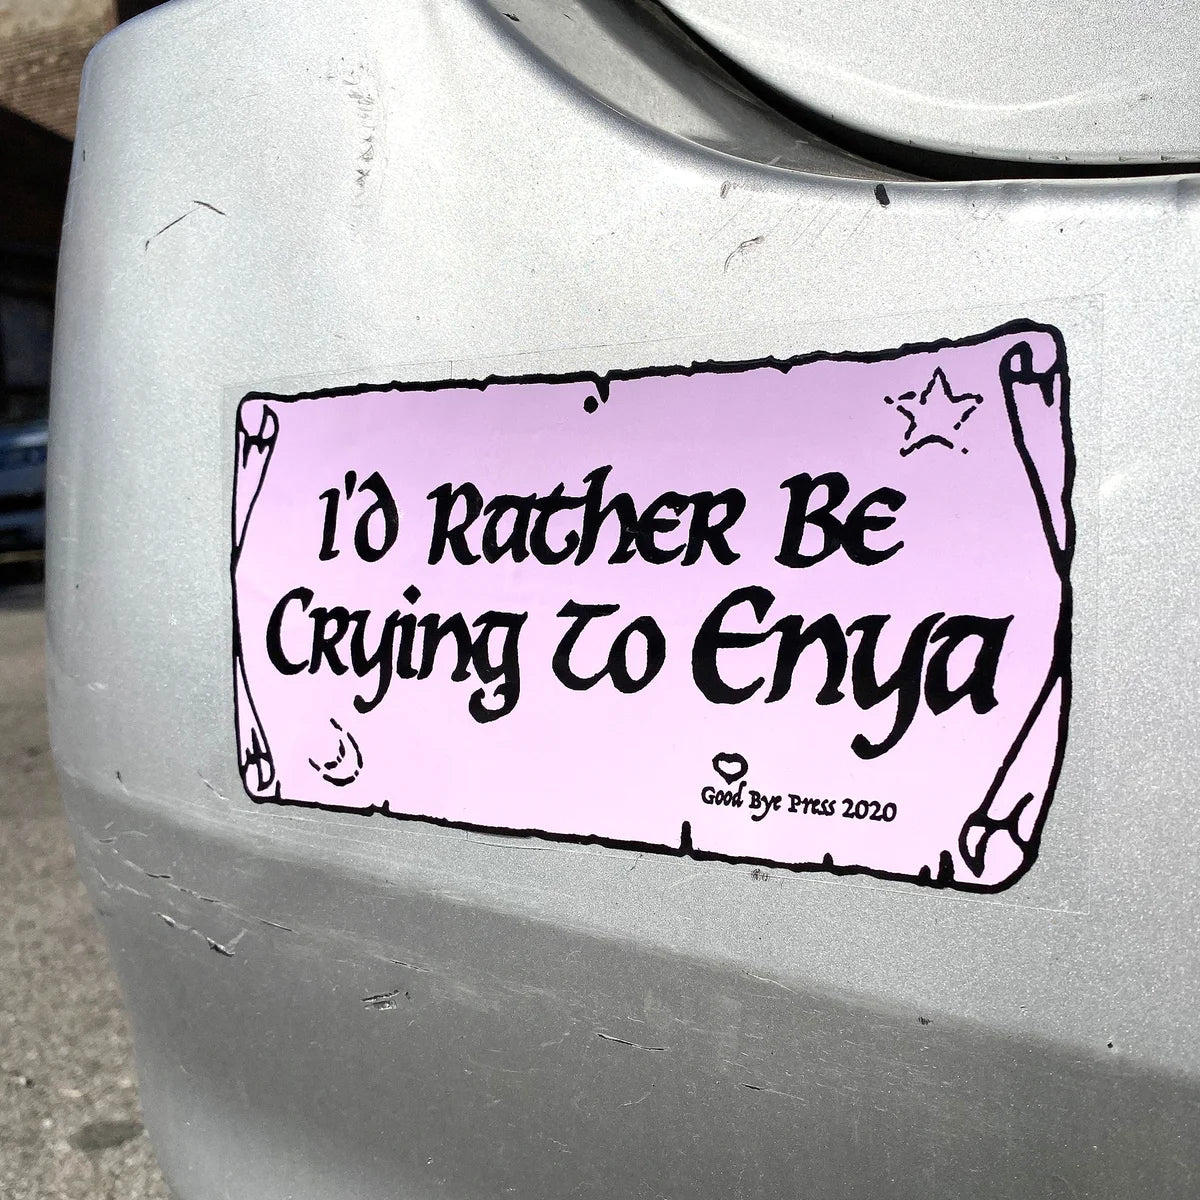 Goodbye Press - I'd Rather Be Crying to Enya Bumper Sticker